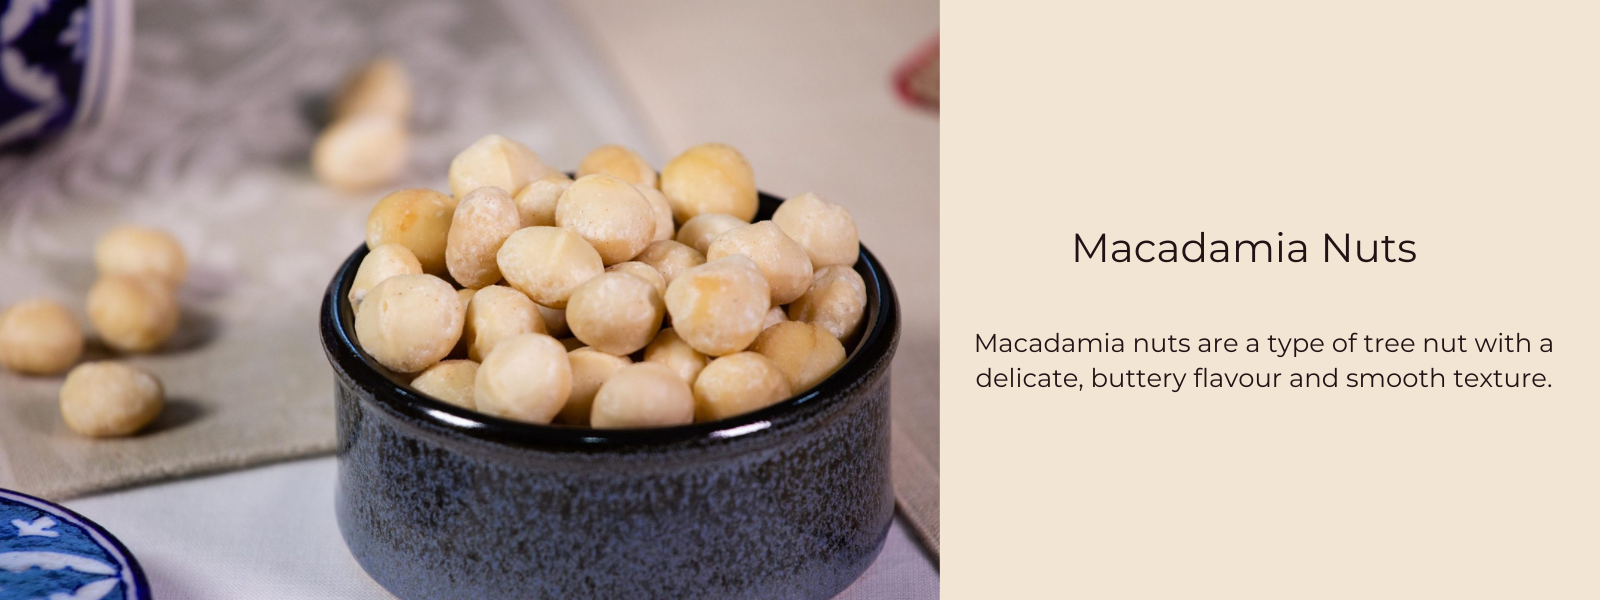 Macadamia Nuts – Health Benefits, Uses and Important Facts